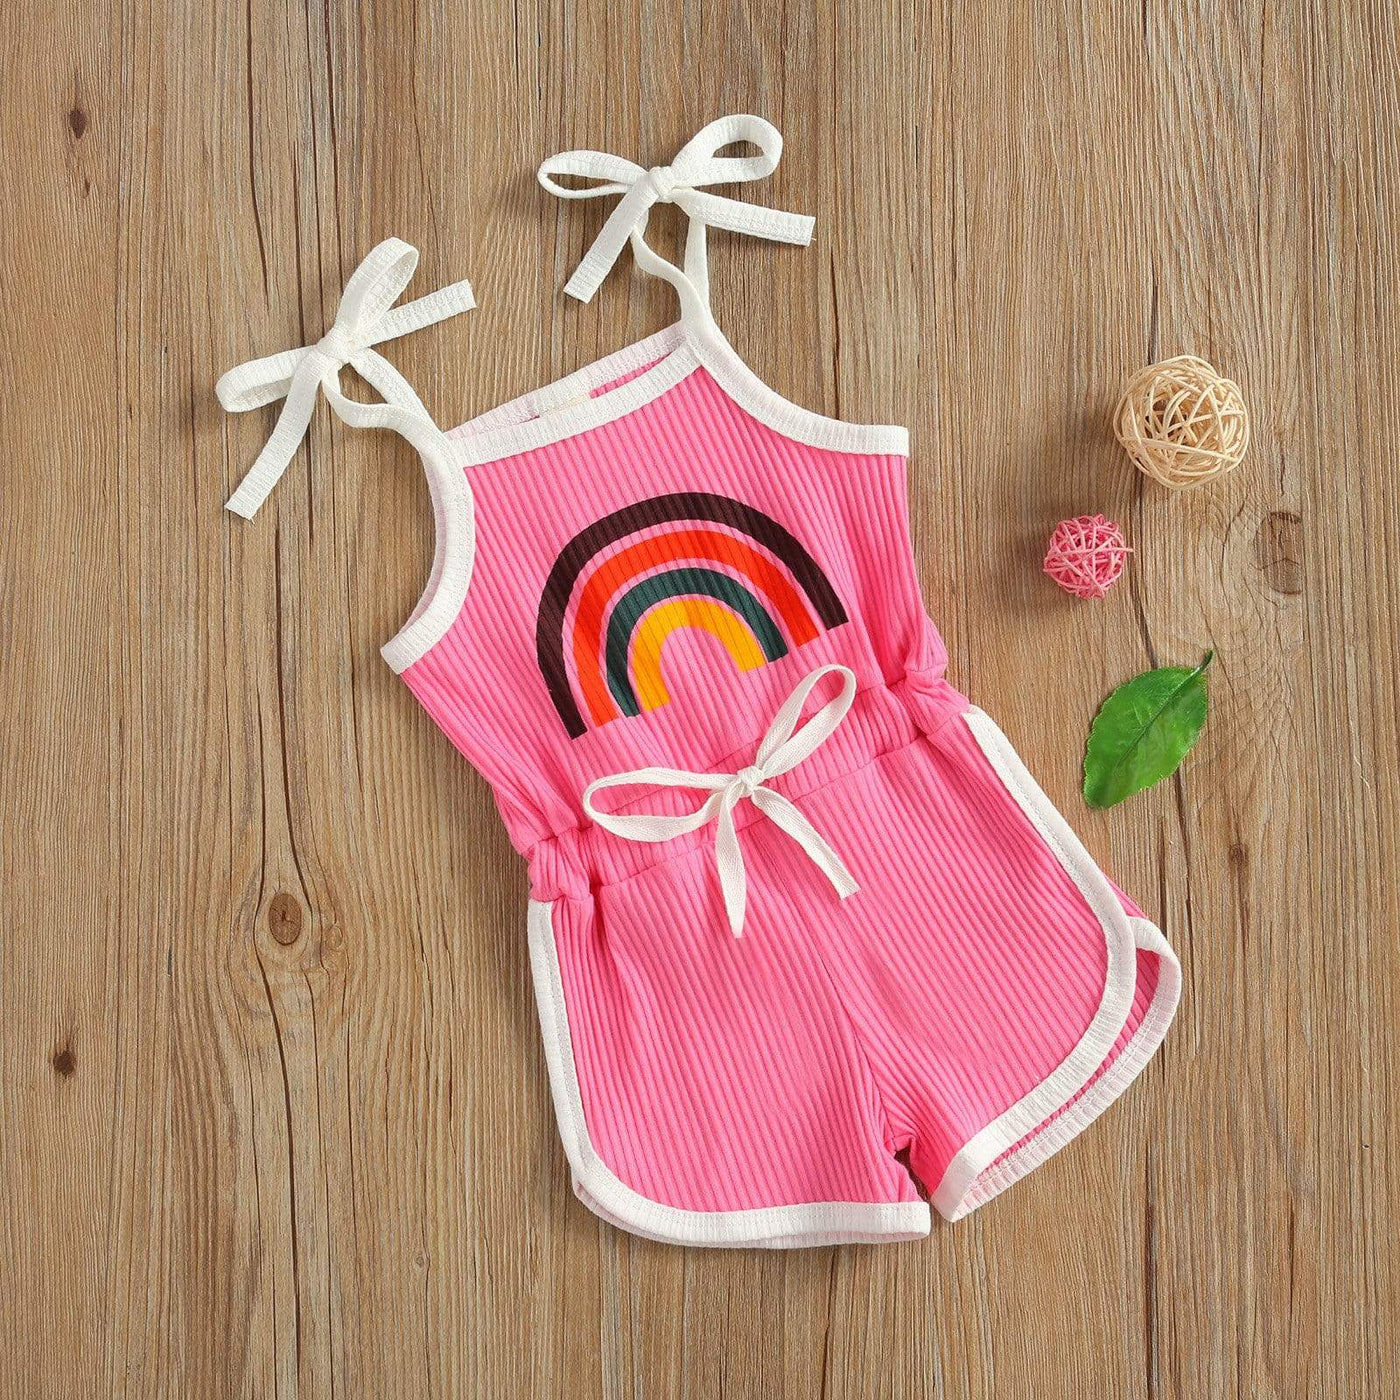 WickedAF Rainbow Print Baby Girl and Toddler Playsuit